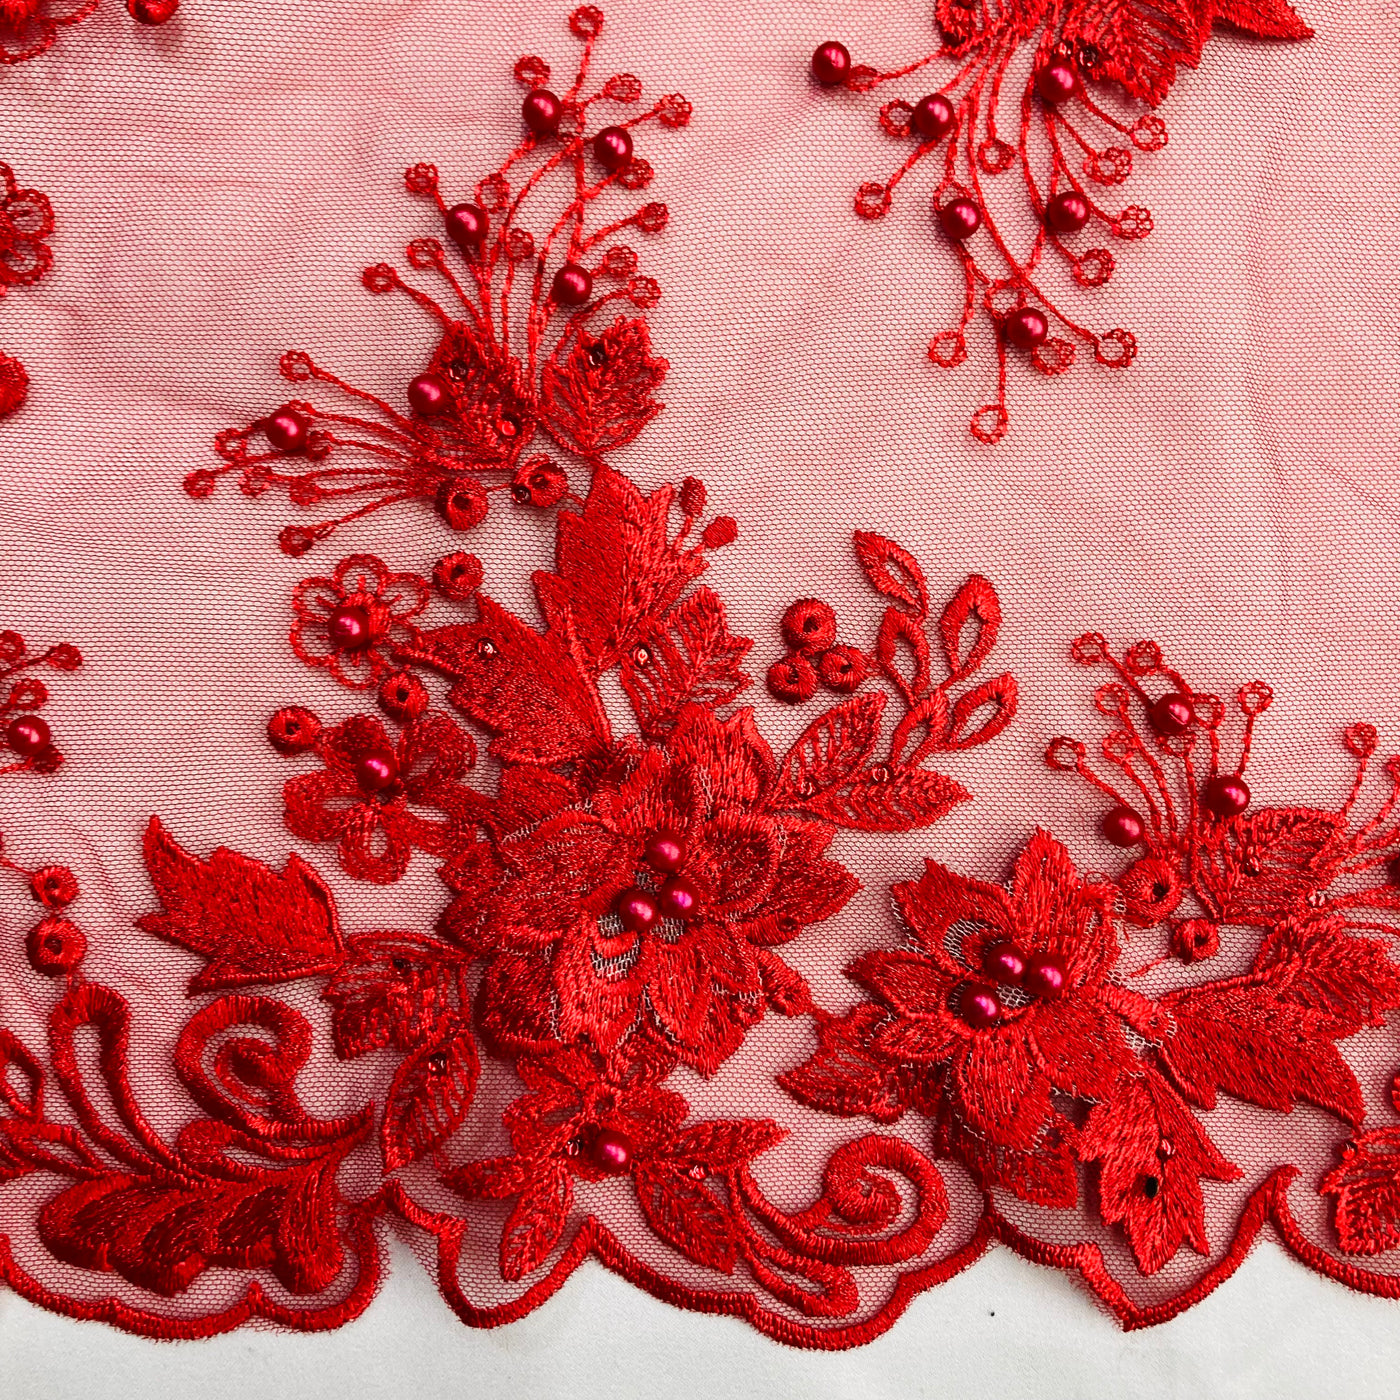 3D Floral Embroidered & Beaded Net Fabric. Lace USA